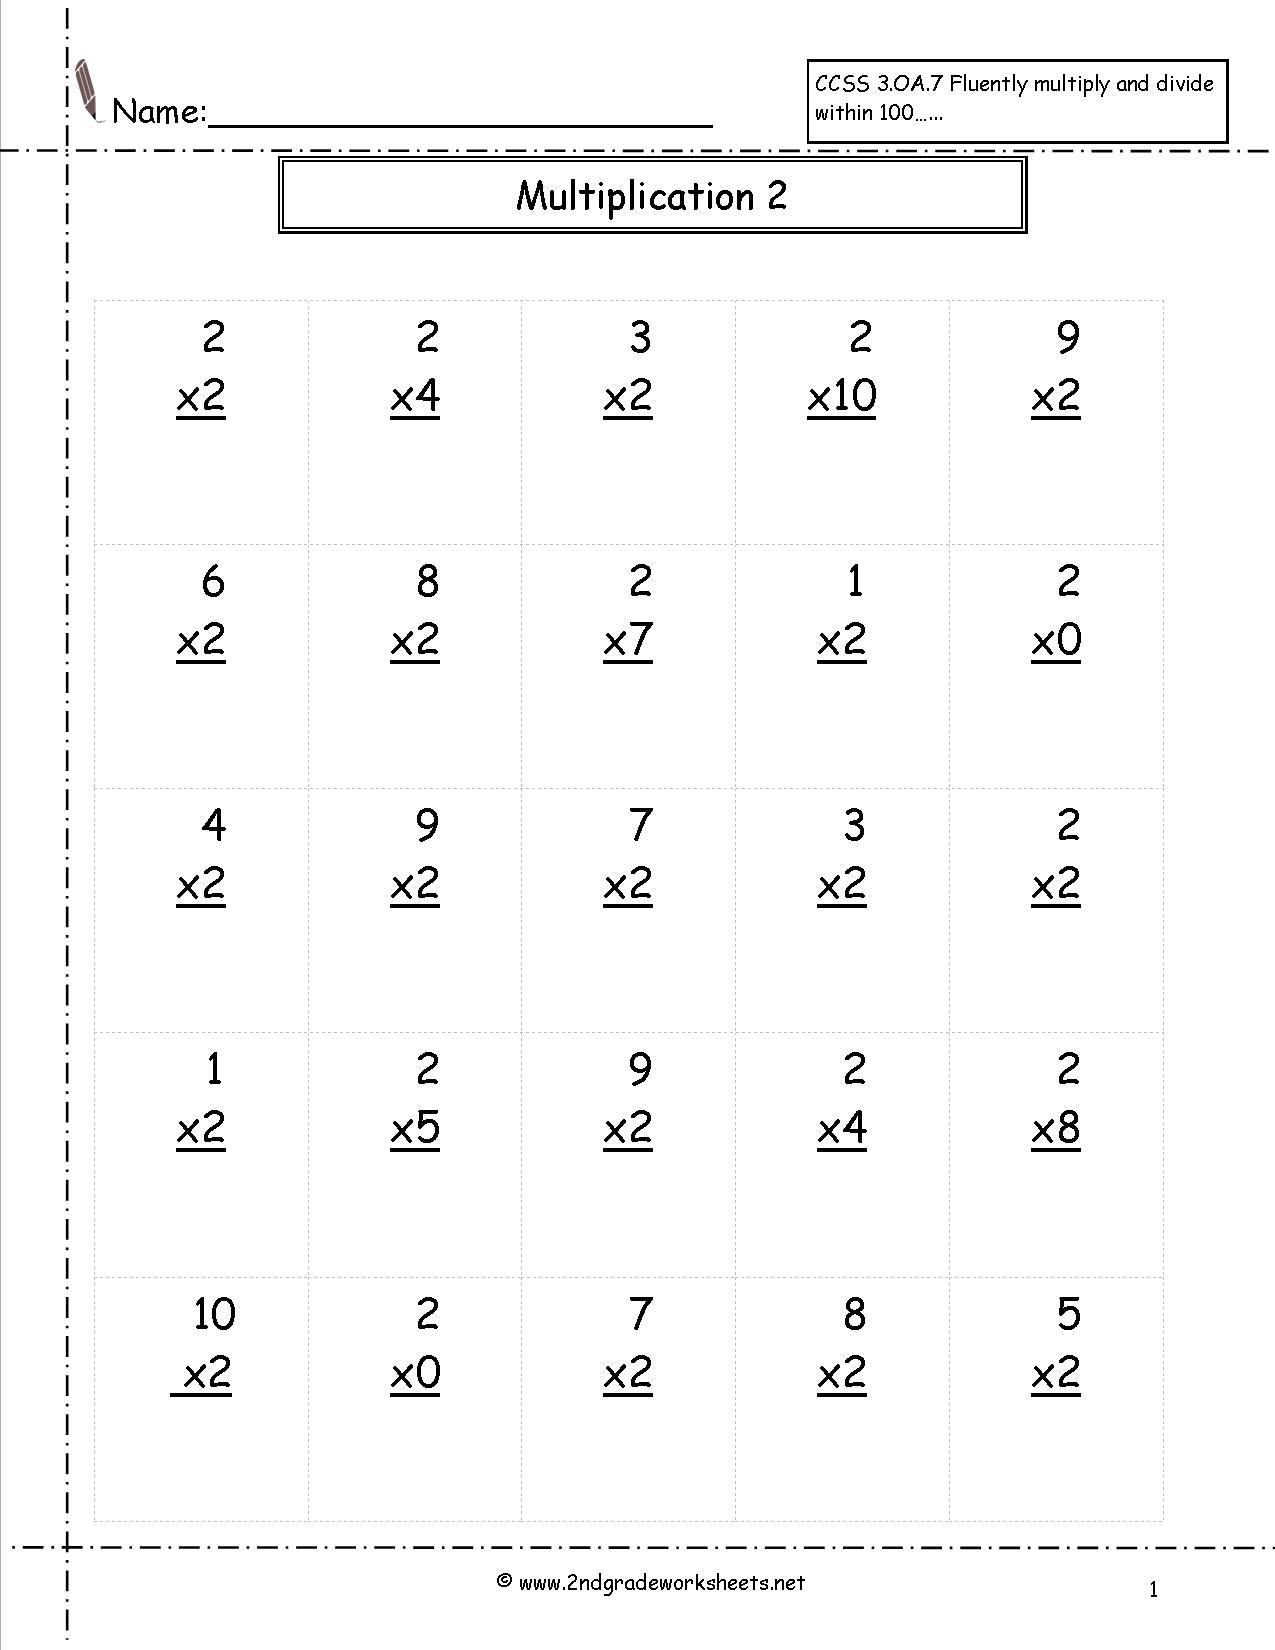 multiplication-cheat-sheets-learn-in-color